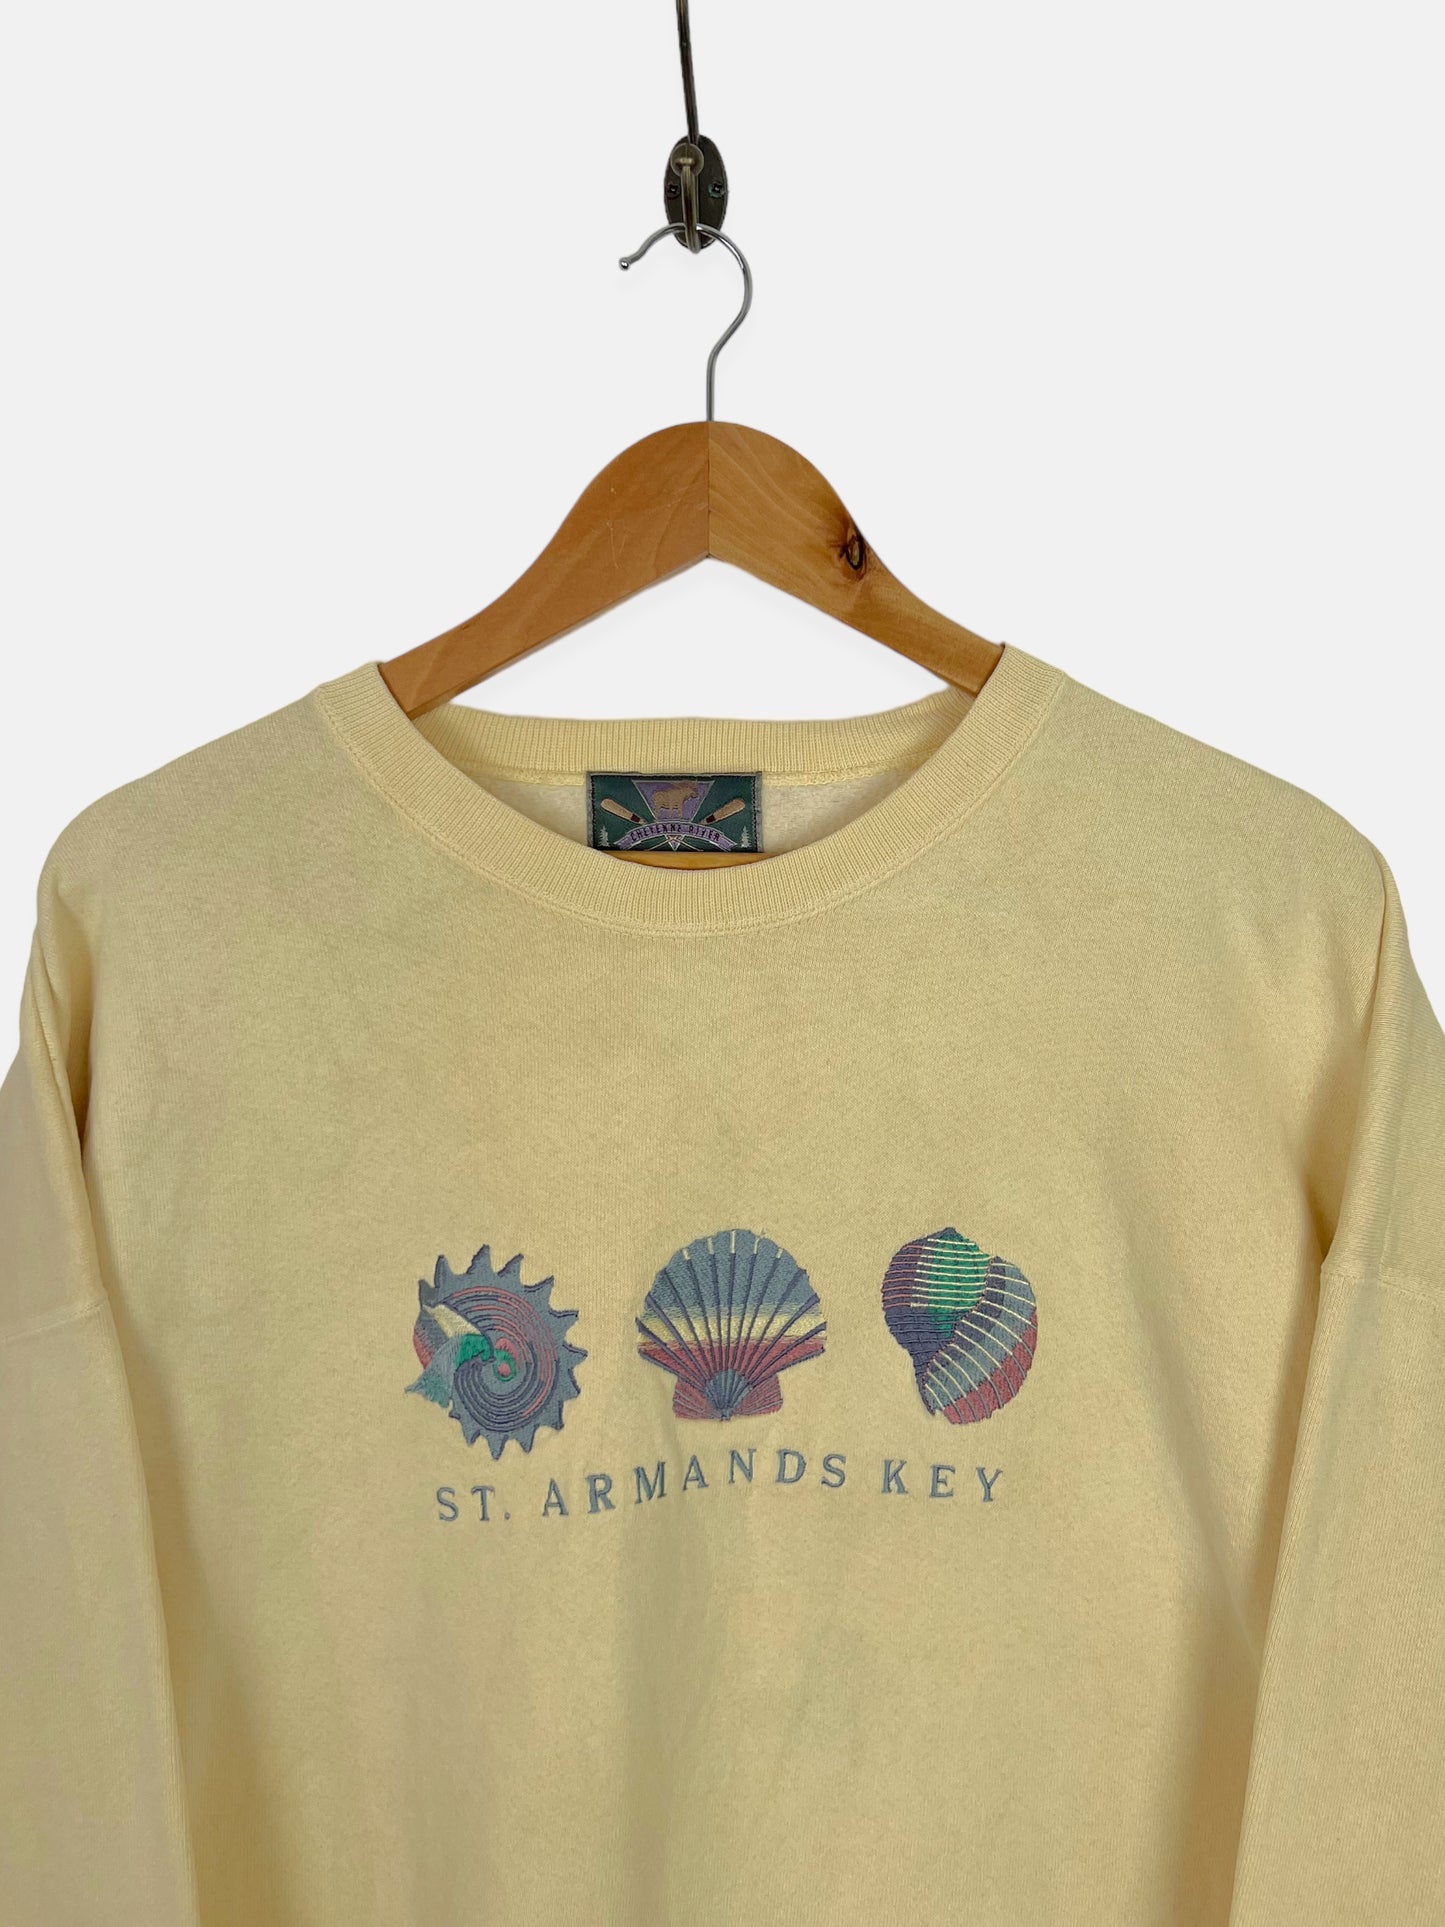 90's St Armands Key USA Made Embroidered Vintage Sweatshirt Size 2XL